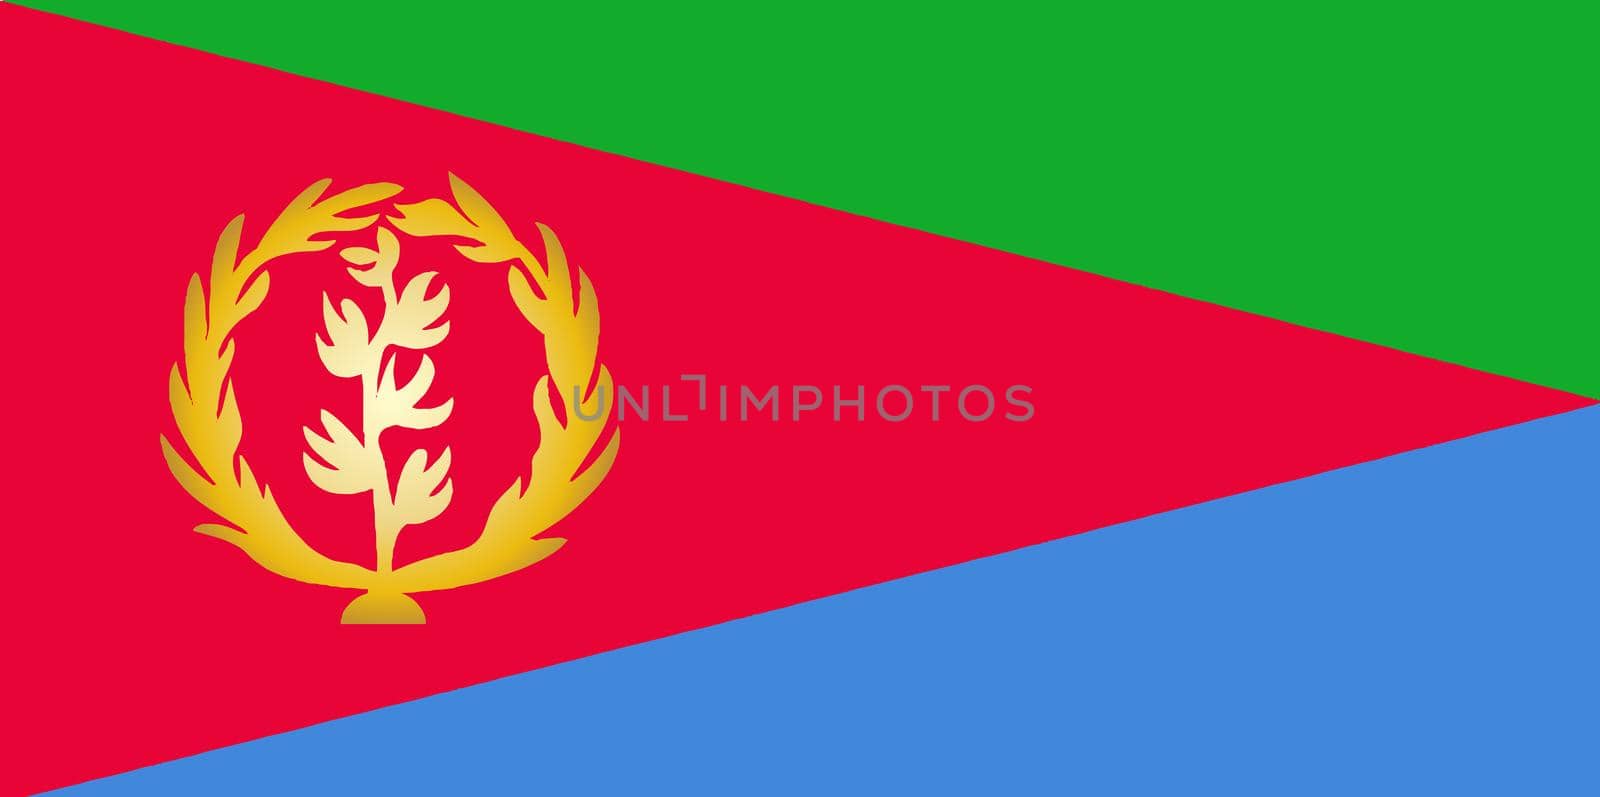 The flag of the African country of Eritrea